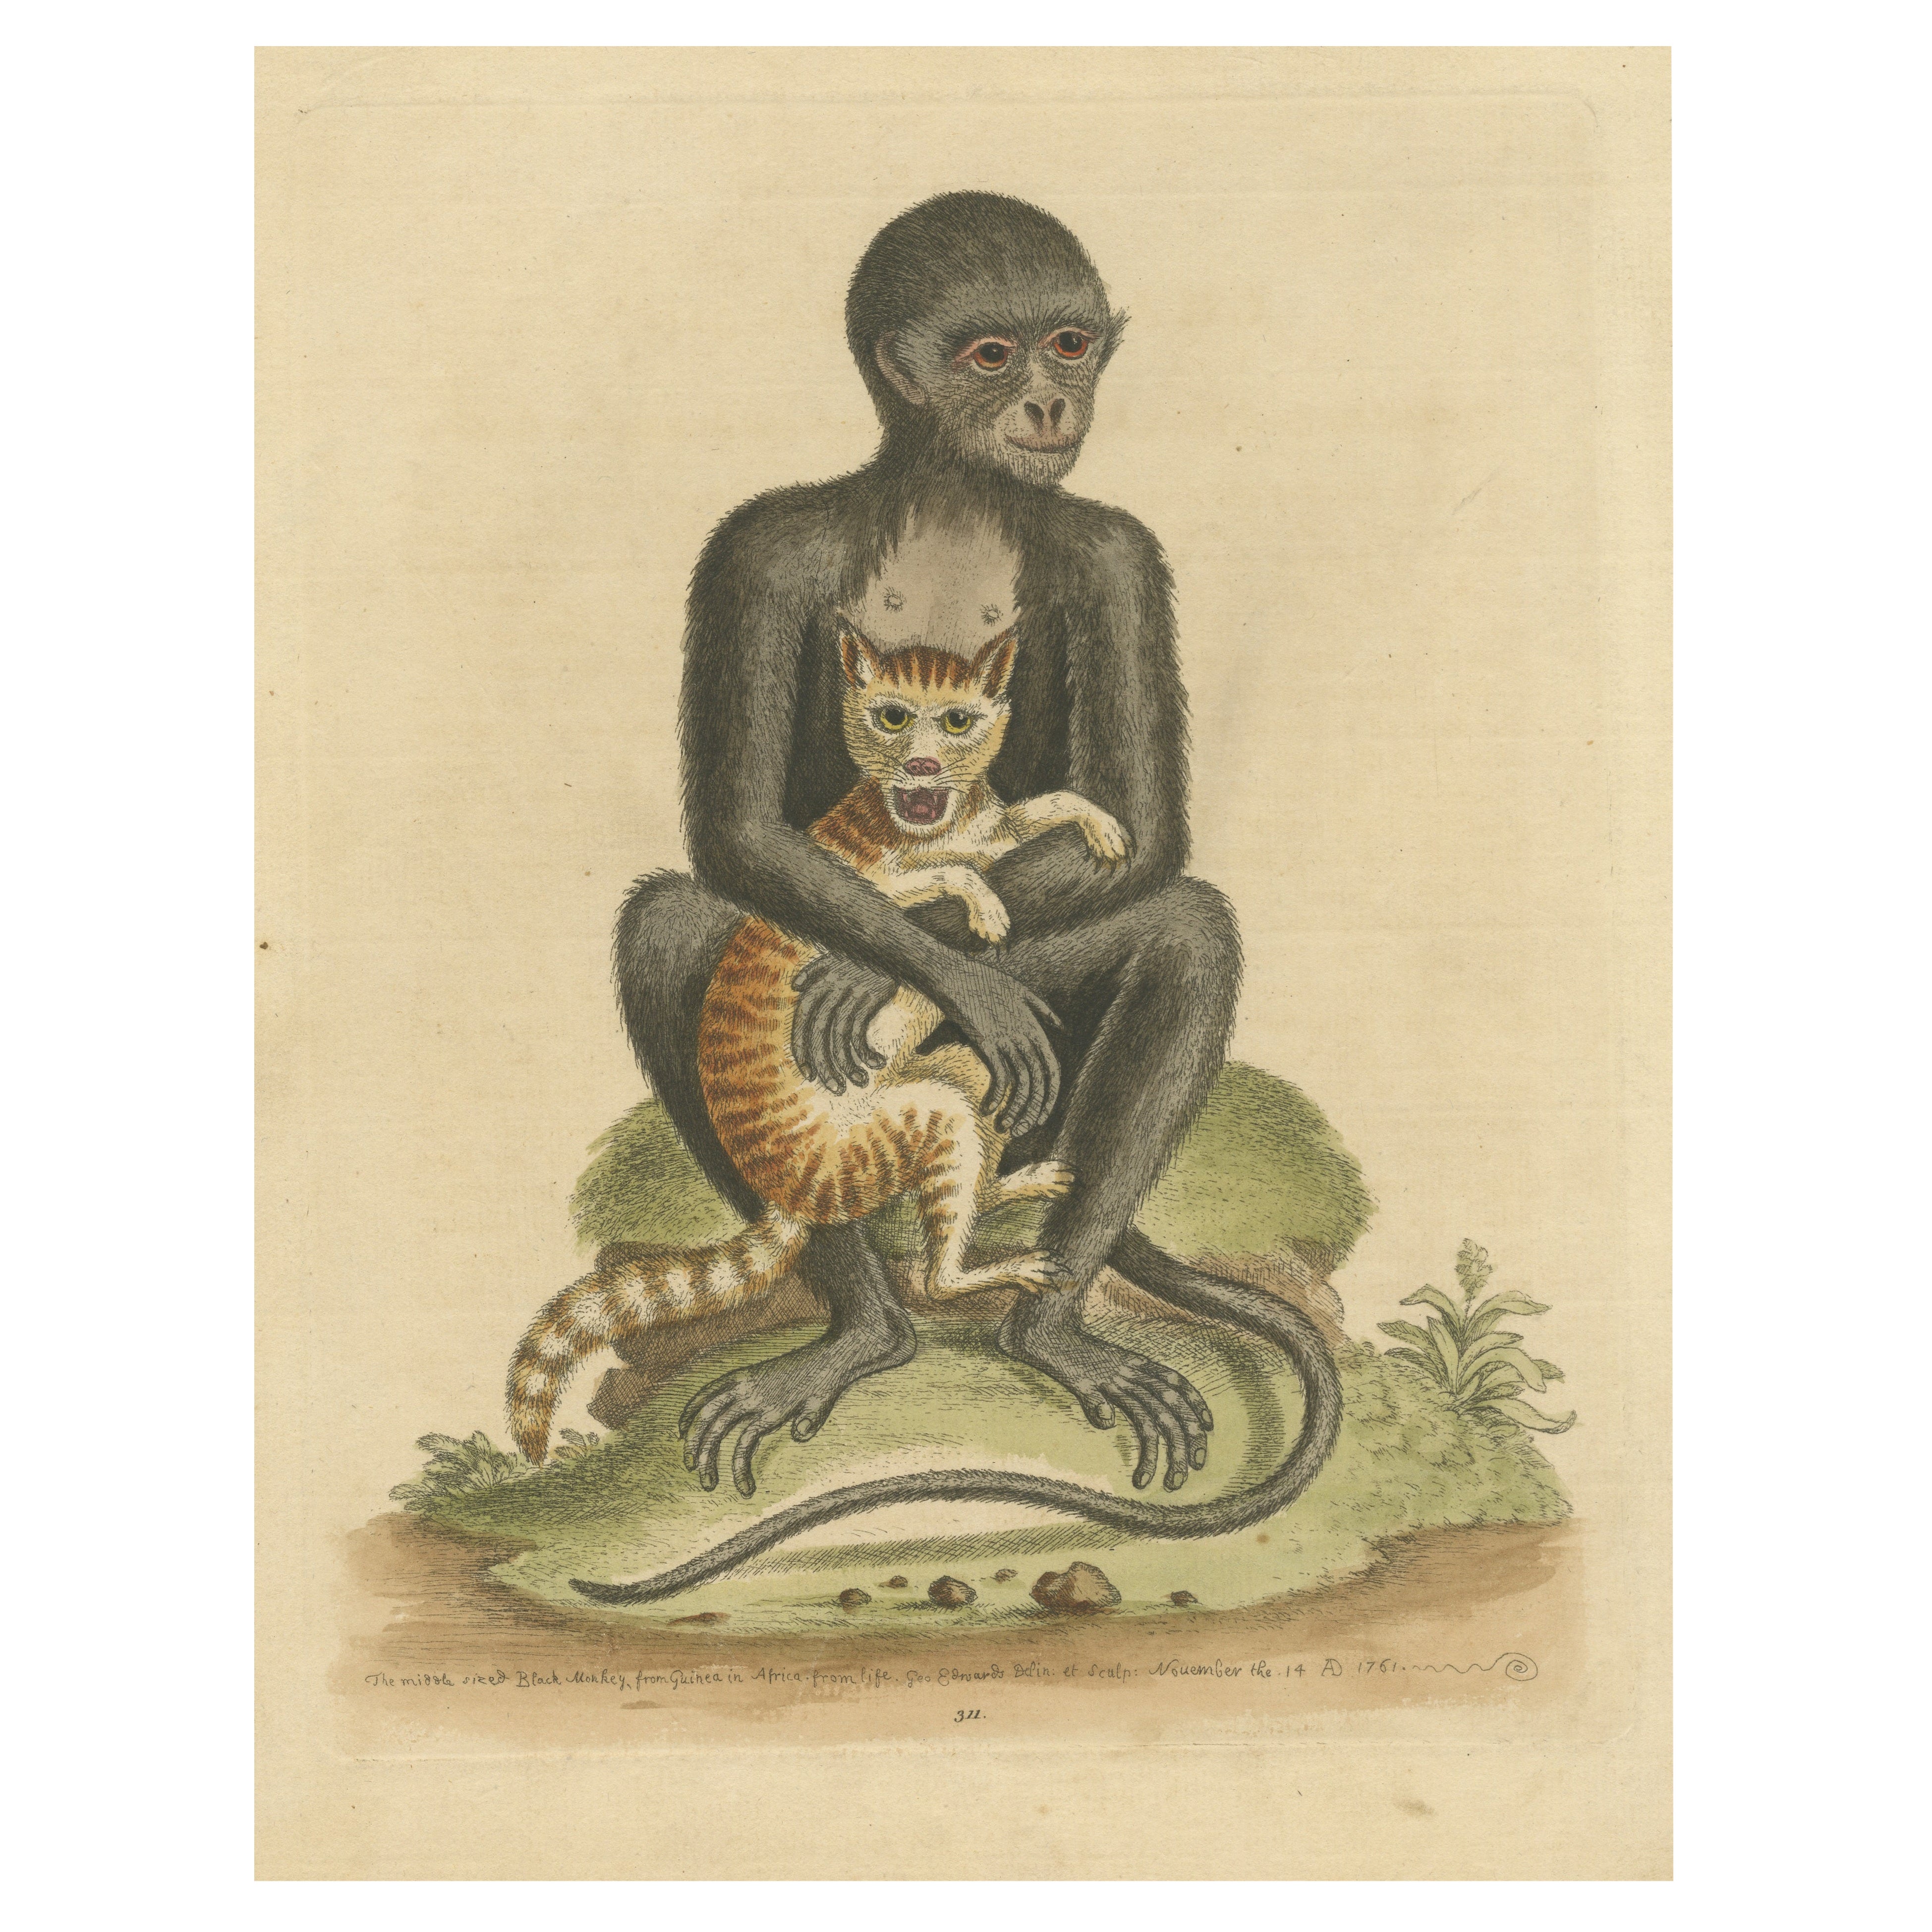 Antique Print of a middle-sized Black Monkey For Sale